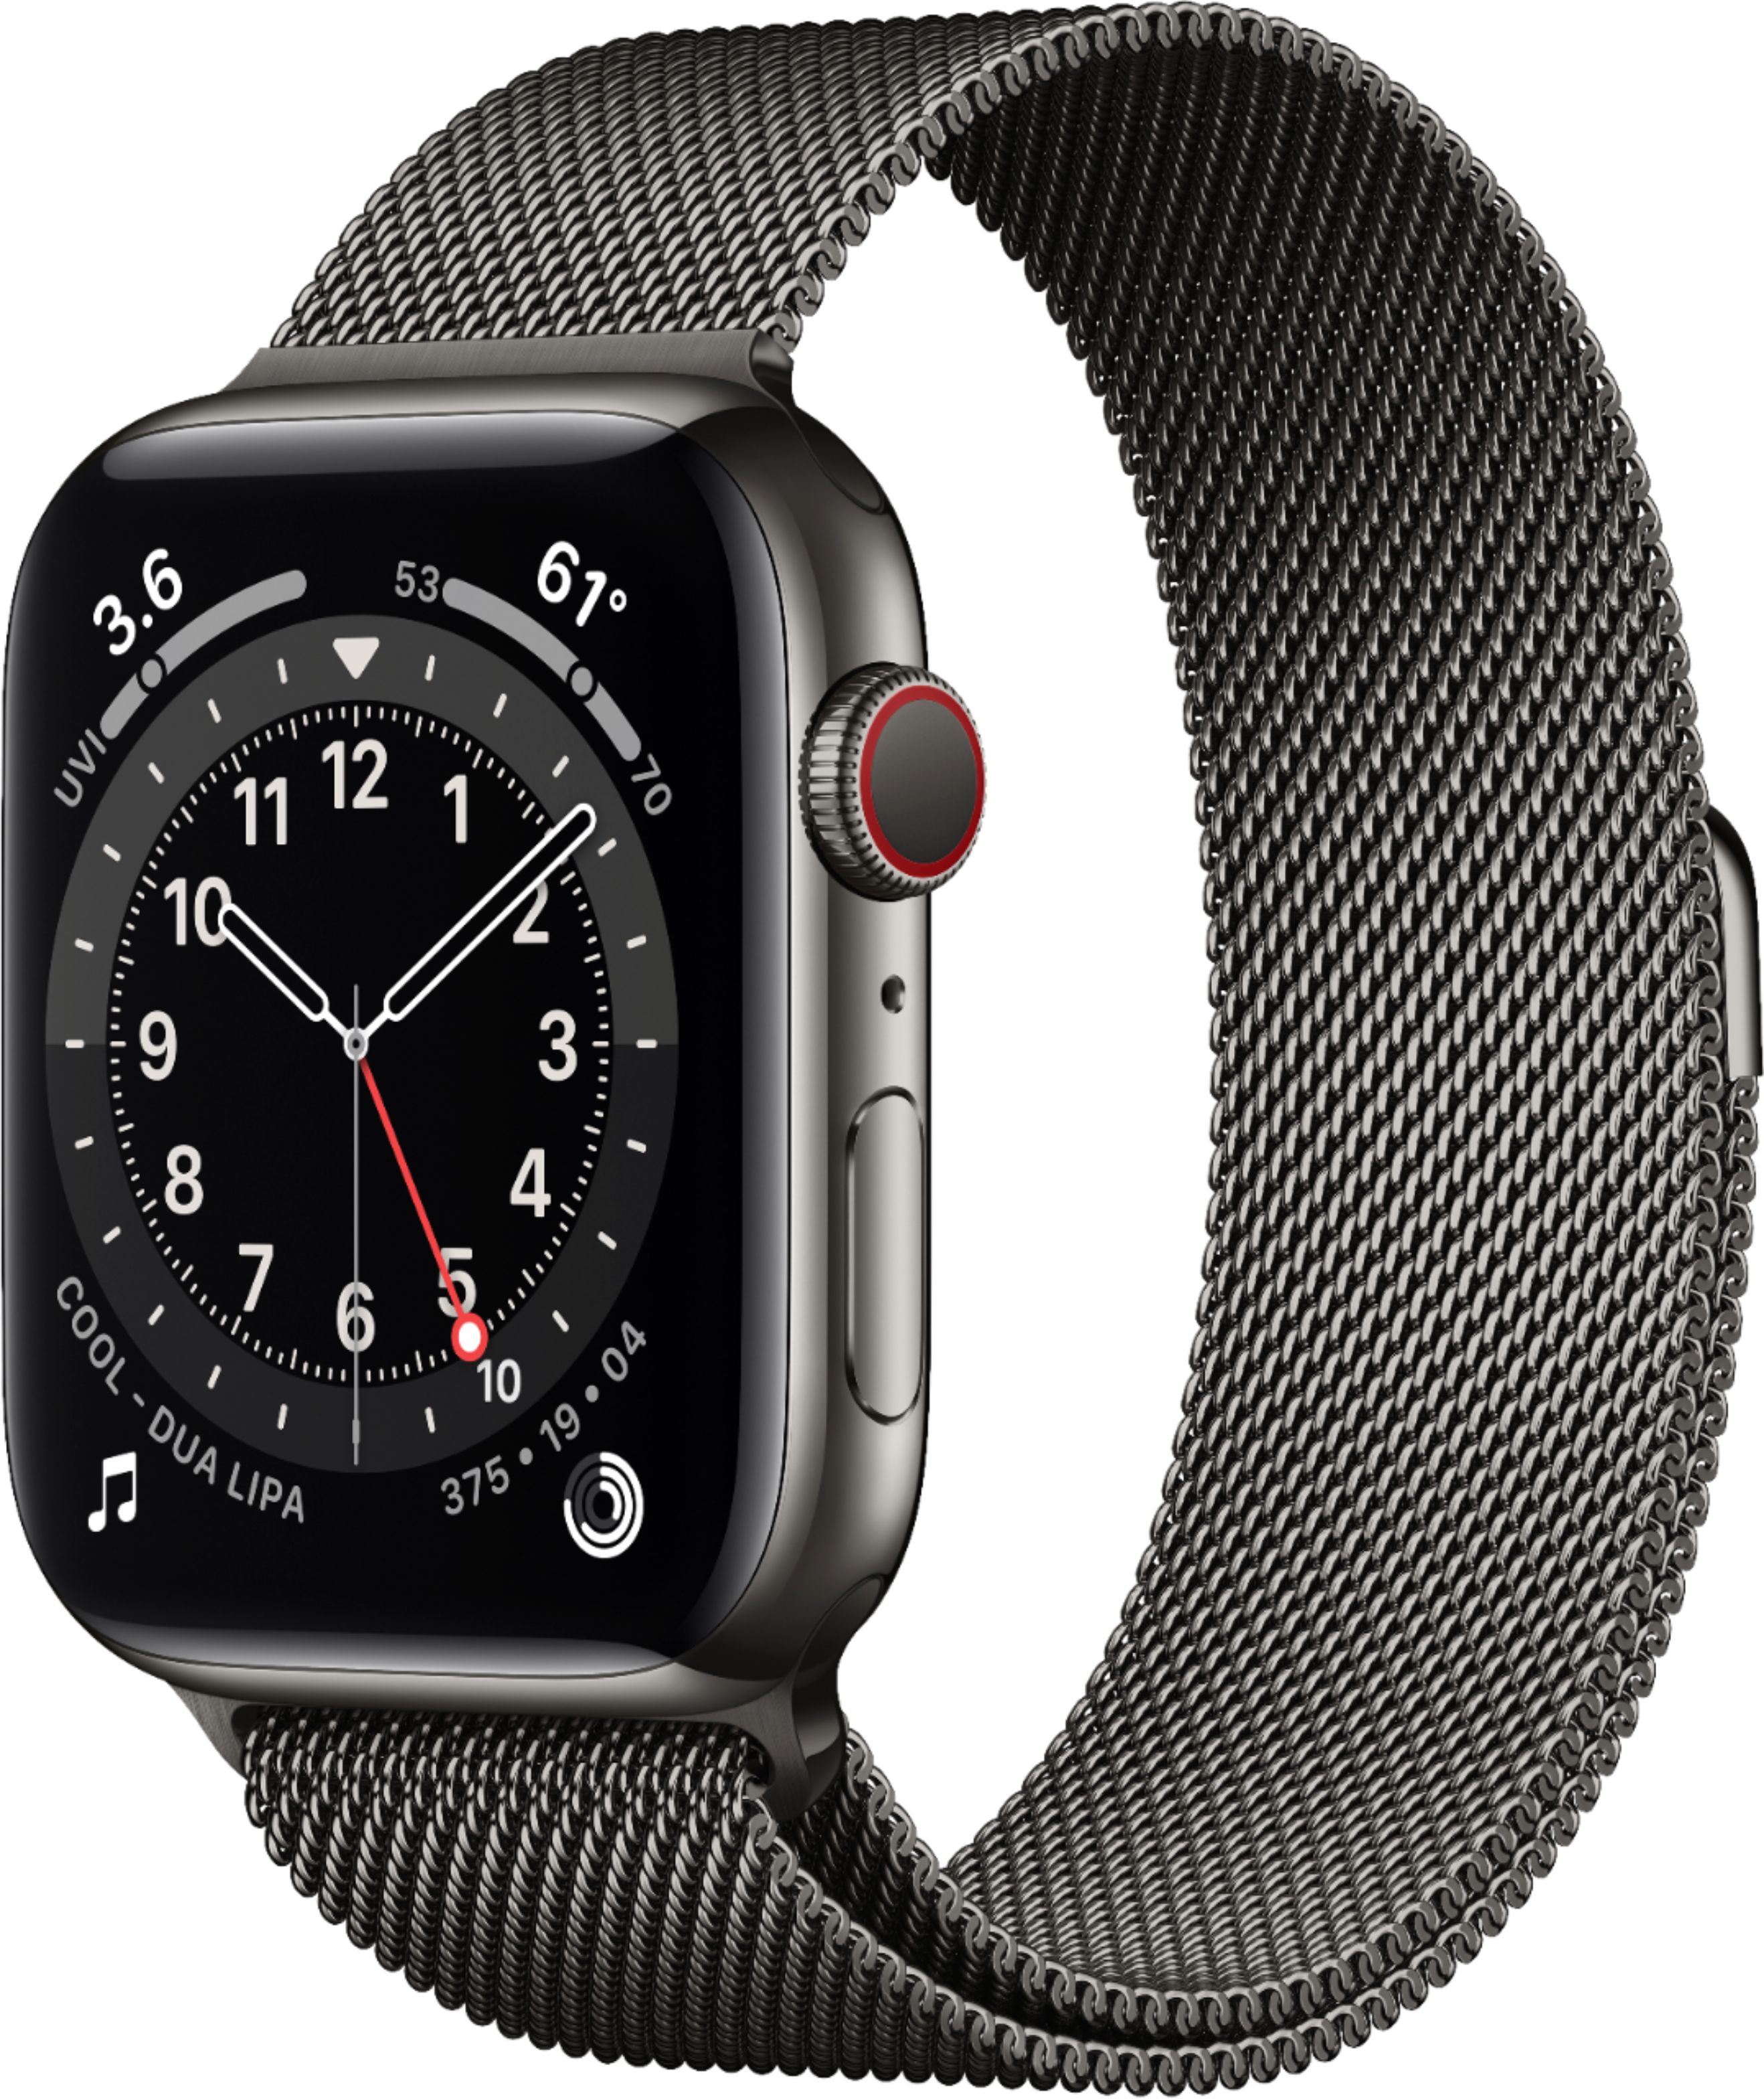 Best Buy: Apple Watch Series 6 (GPS + Cellular) 44mm Graphite Stainless  Steel Case with Graphite Milanese Loop Silver M07R3LL/A